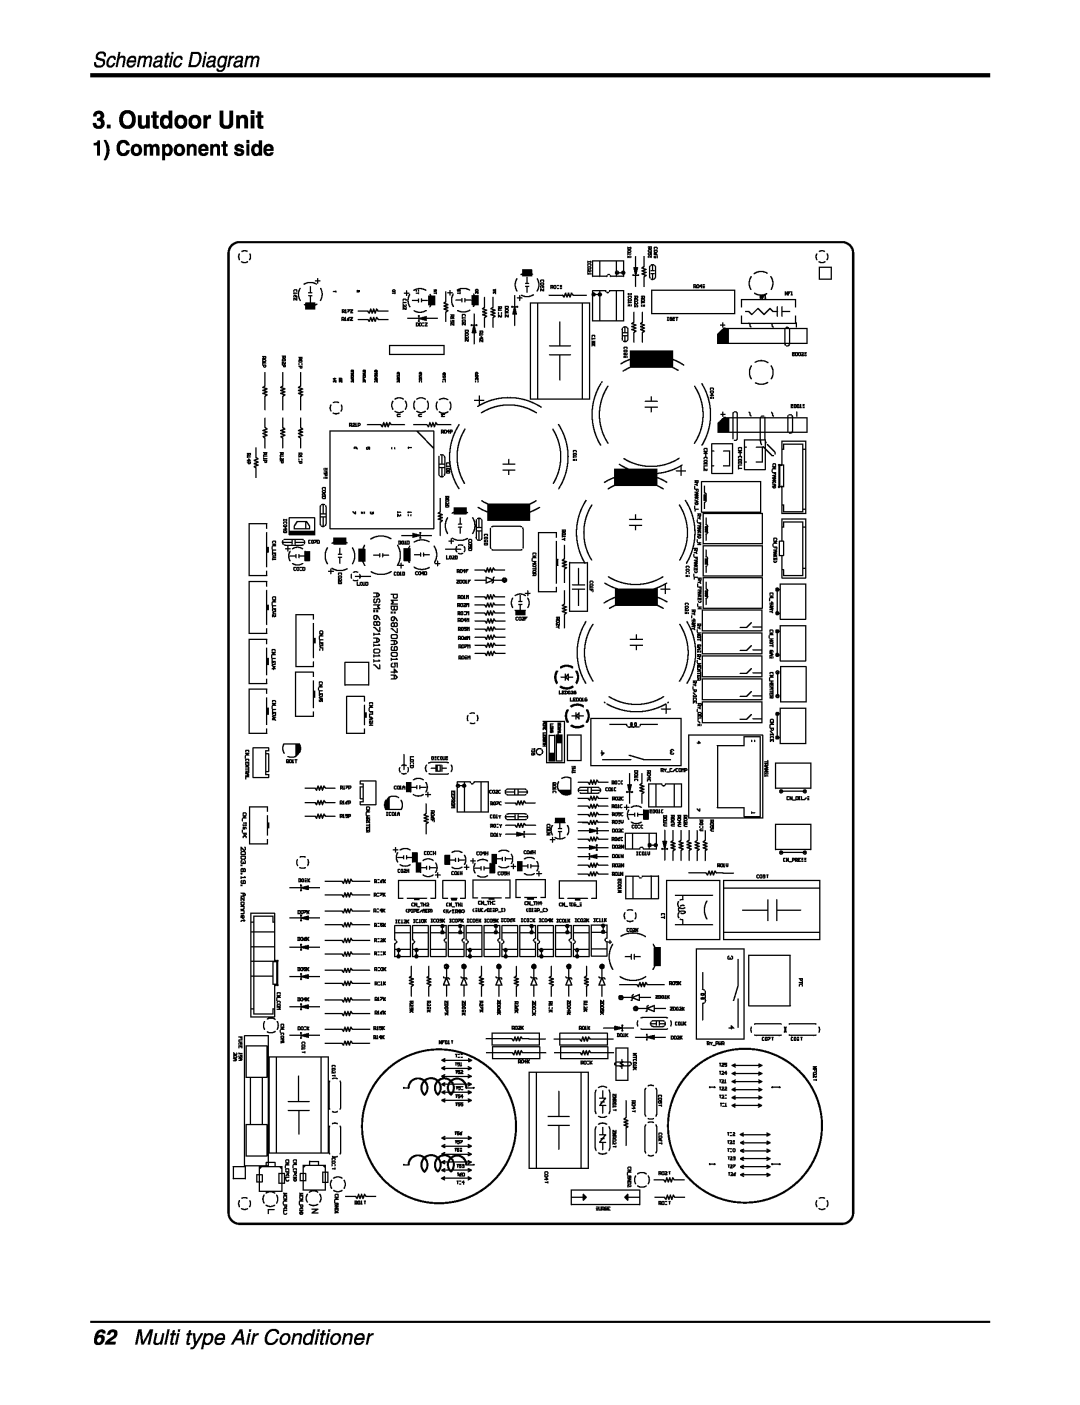 LG Electronics AMNH093APM0(LMAN090HNS) Component side, Multi type Air Conditioner, Outdoor Unit, Schematic Diagram 